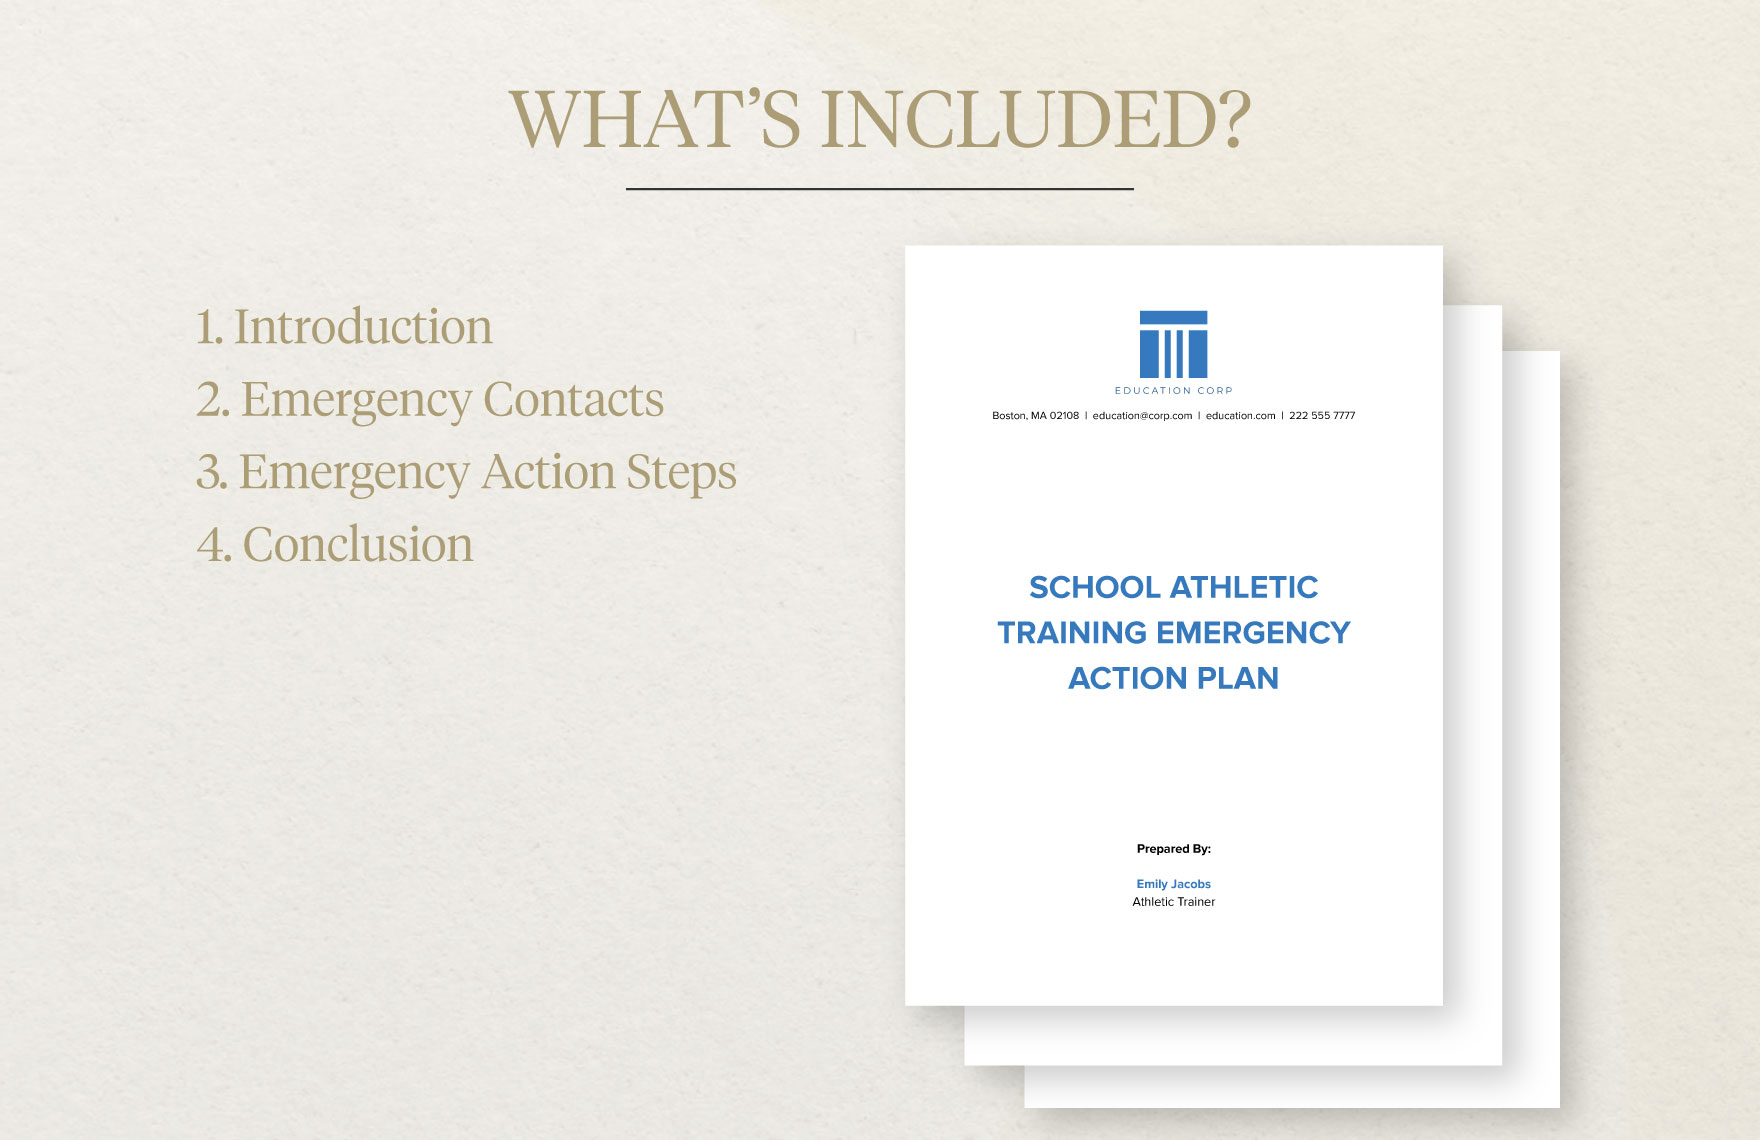 School Athletic Training Emergency Action Plan Template